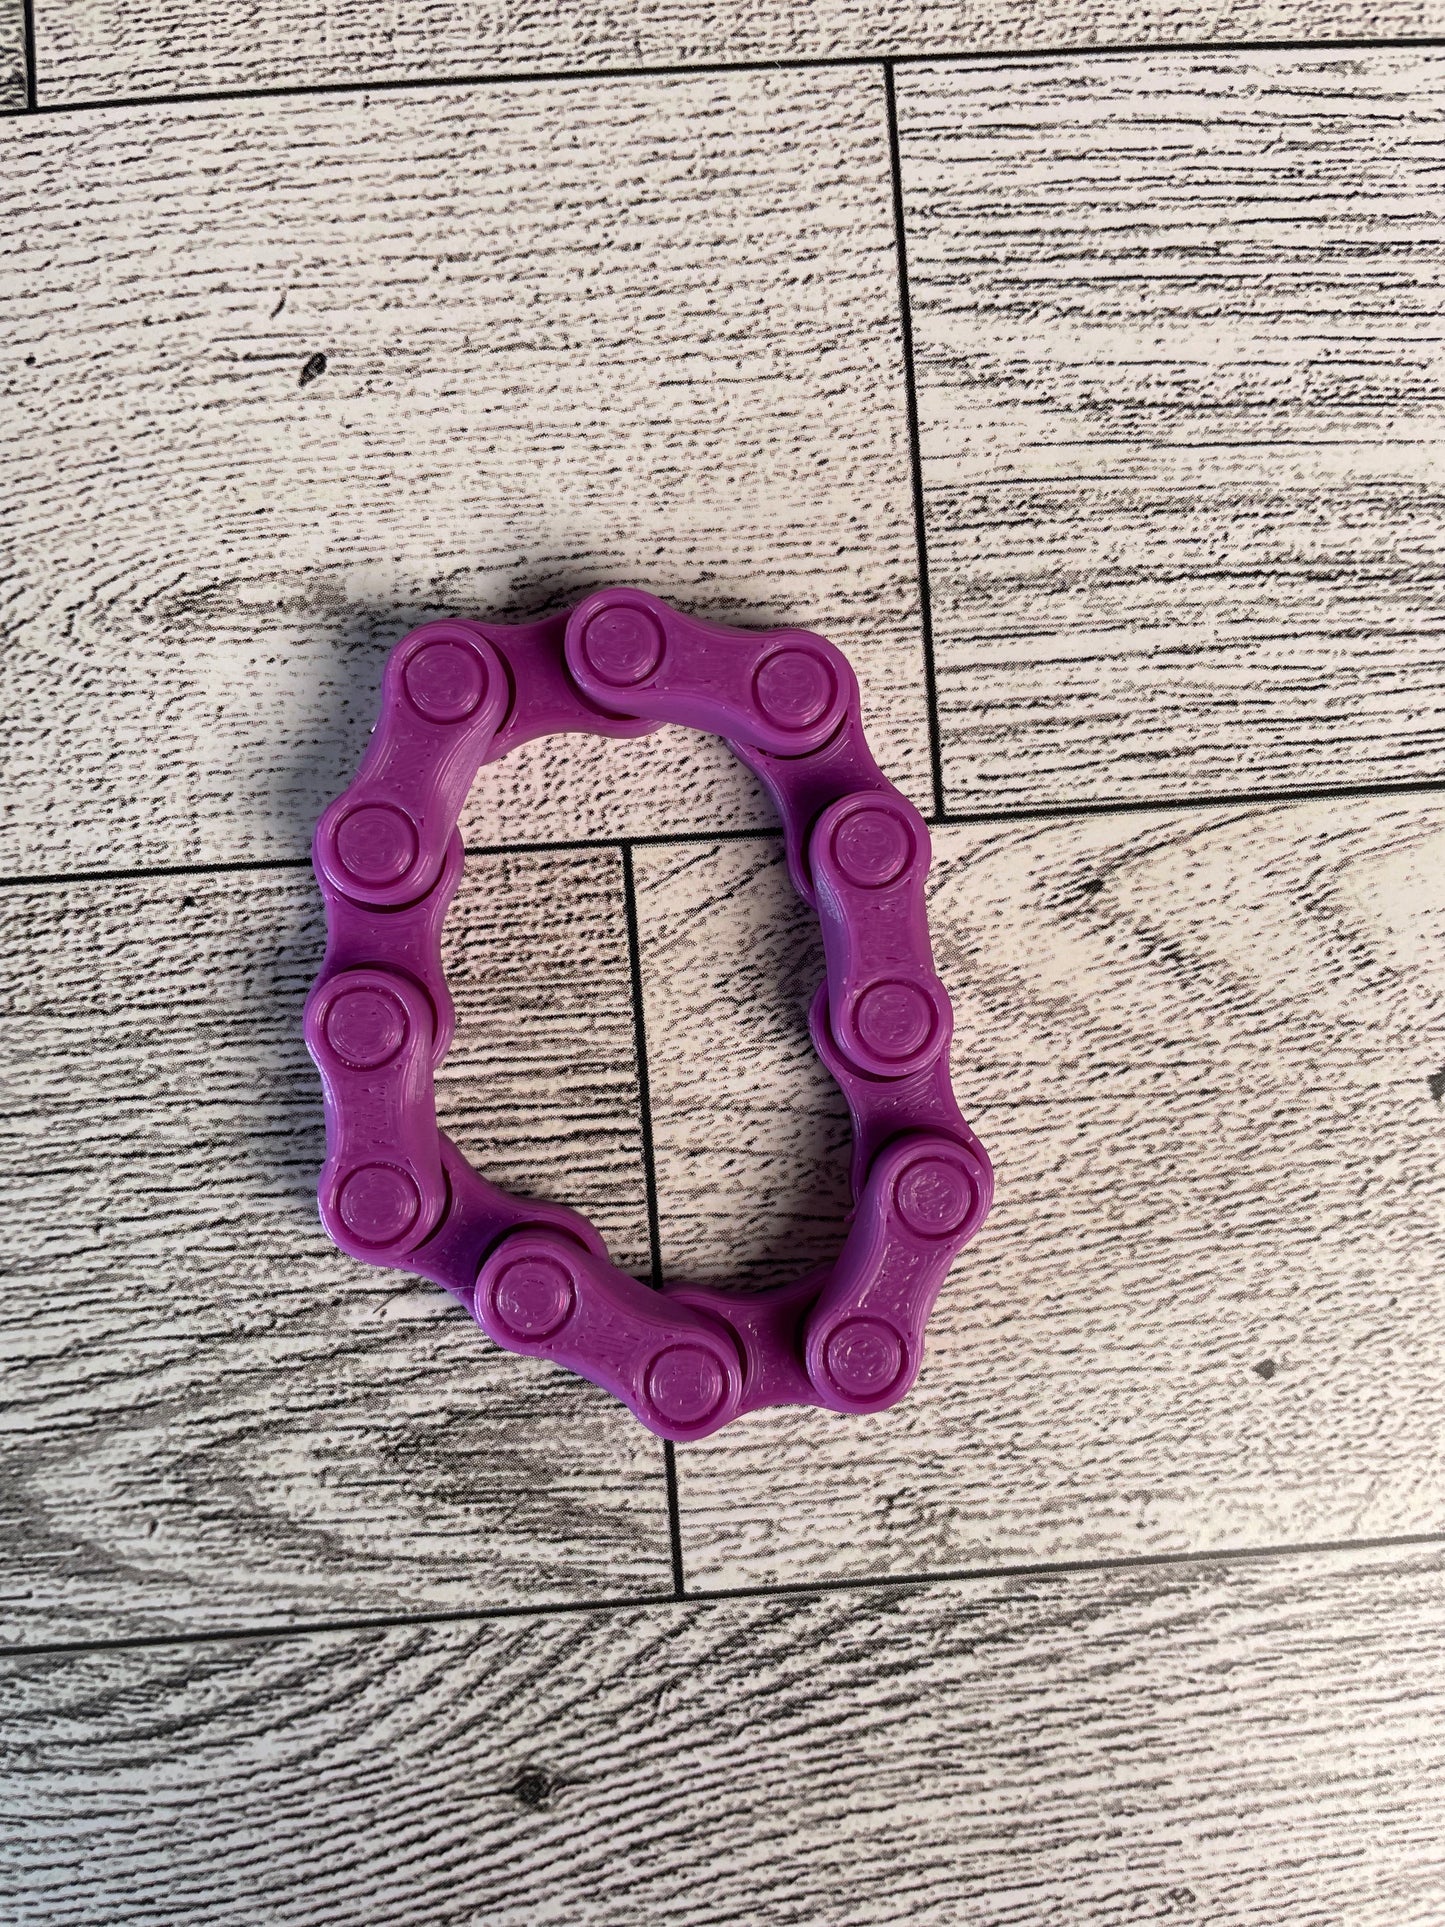 A purple chain link on a wood backdrop. The chain is arranged in a oval shape and there are six links.